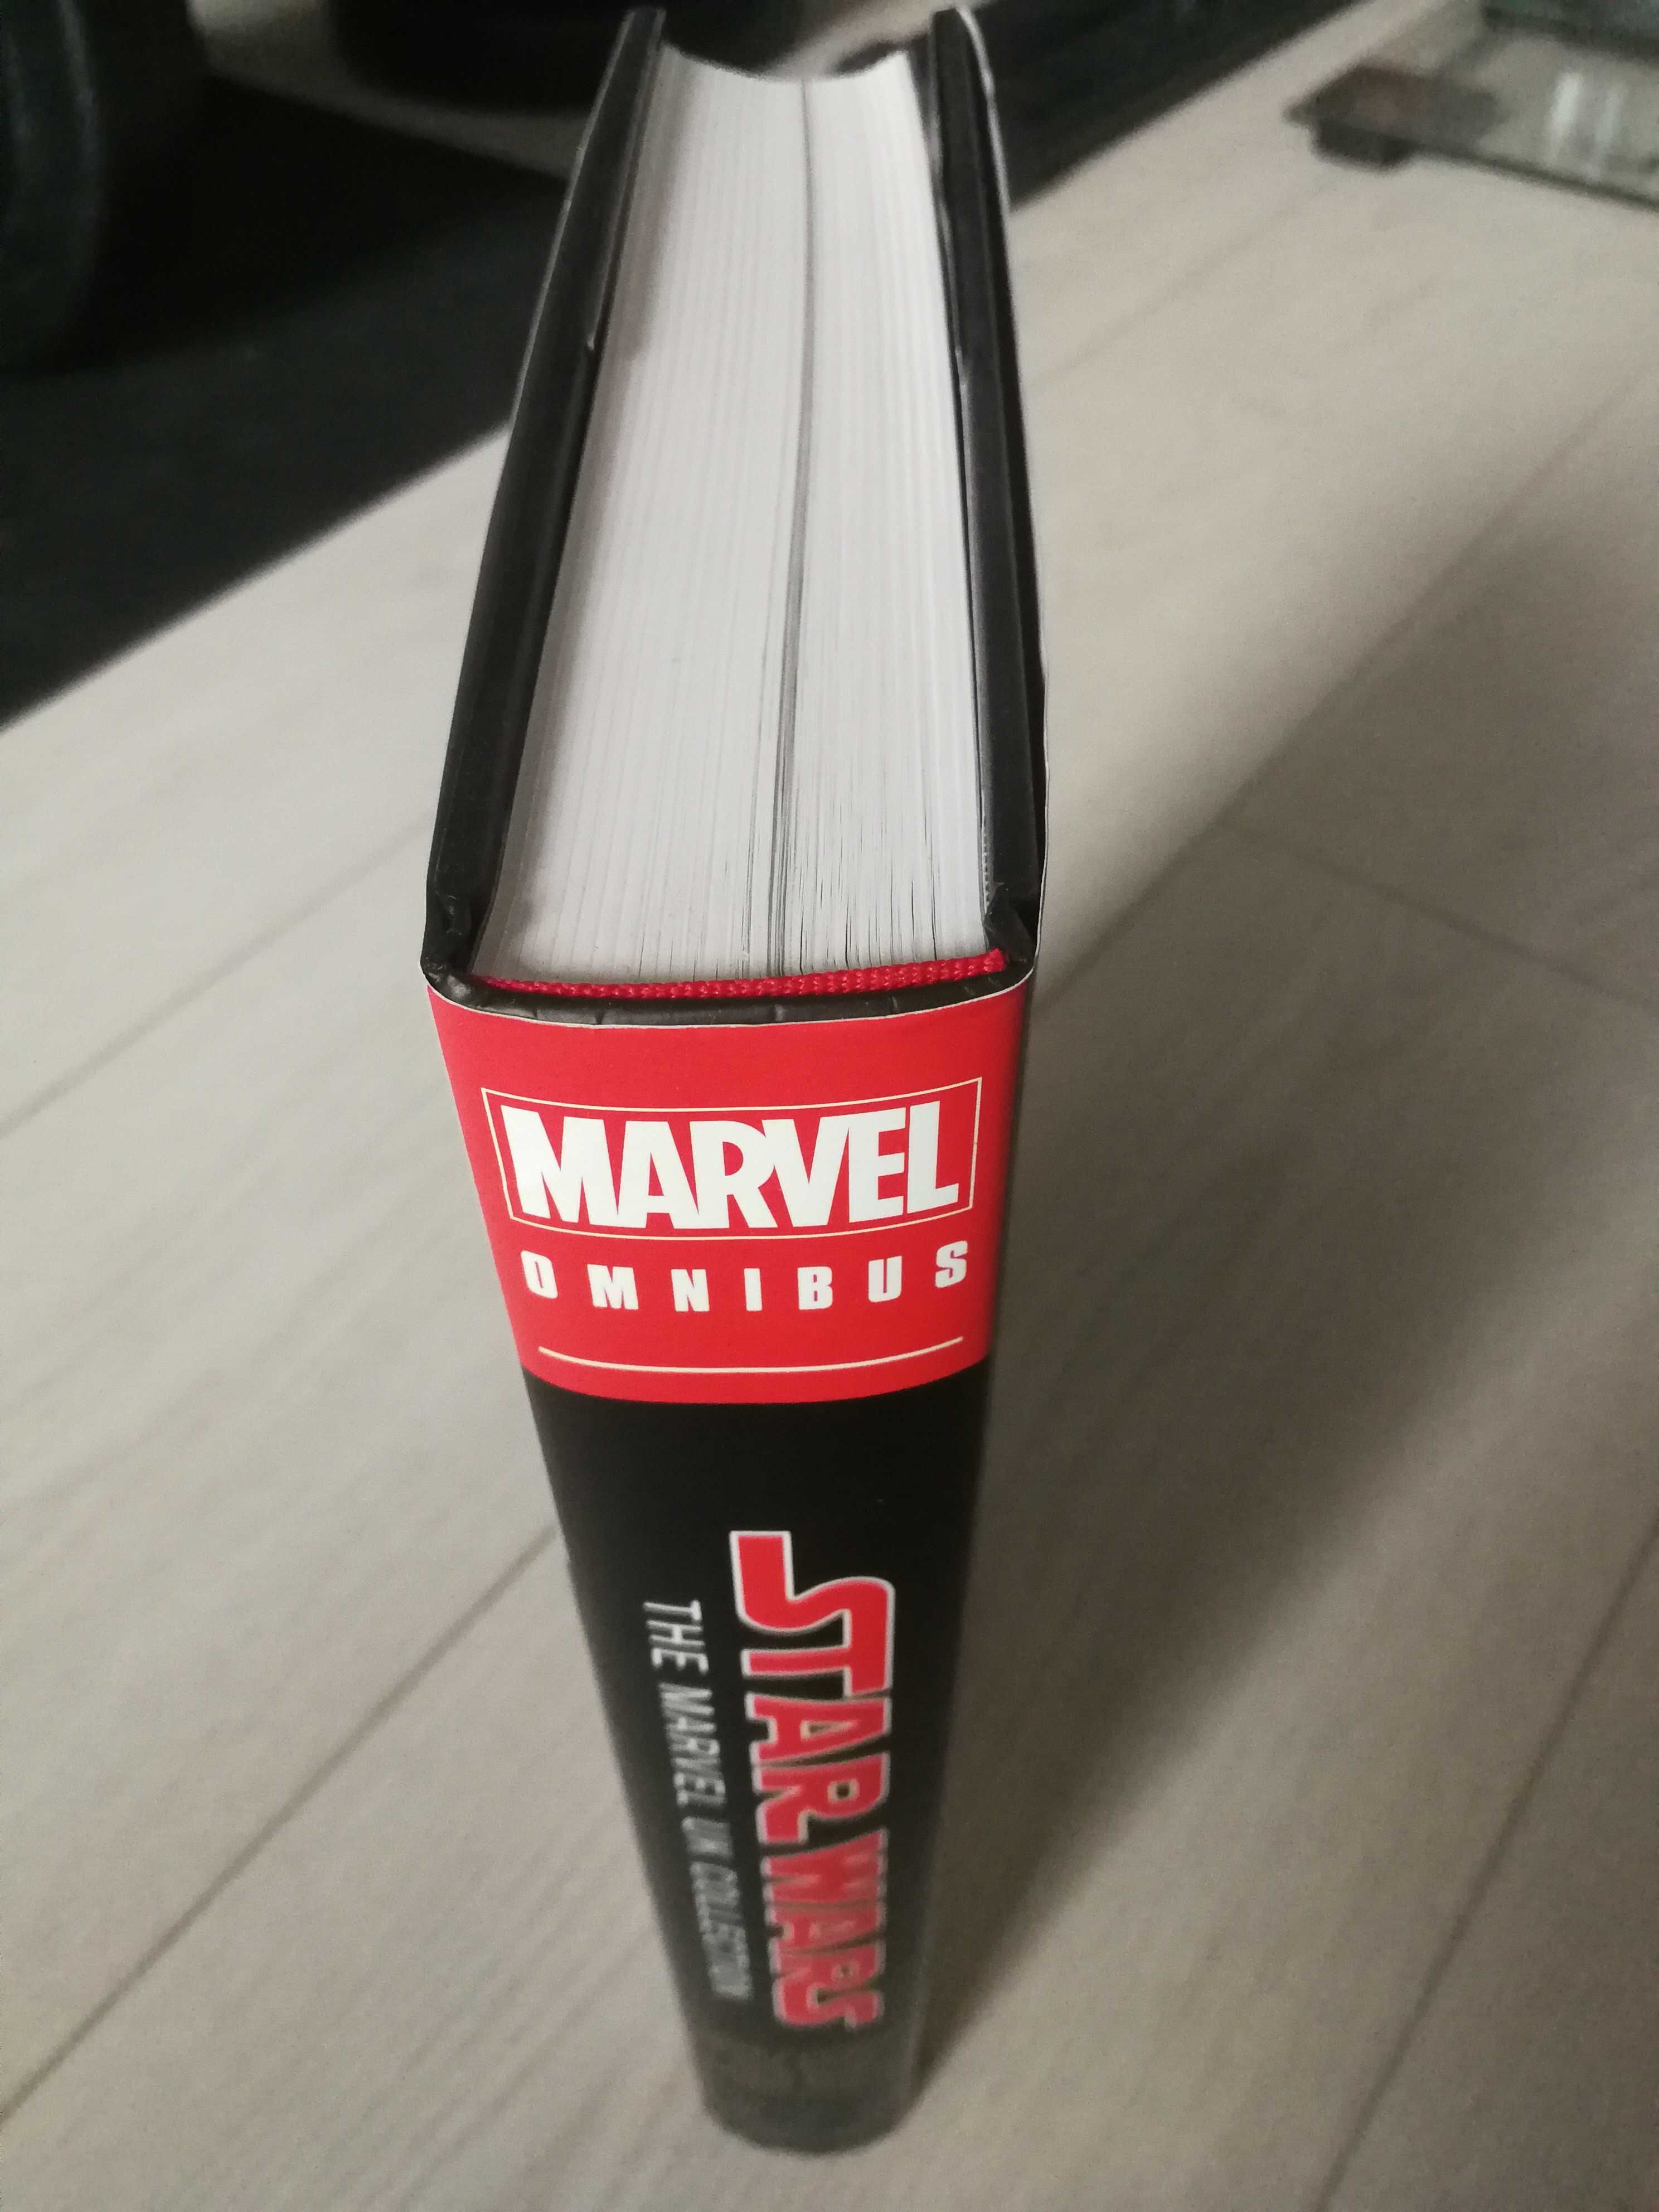 Star Wars The Marvel UK Collection Omnibus